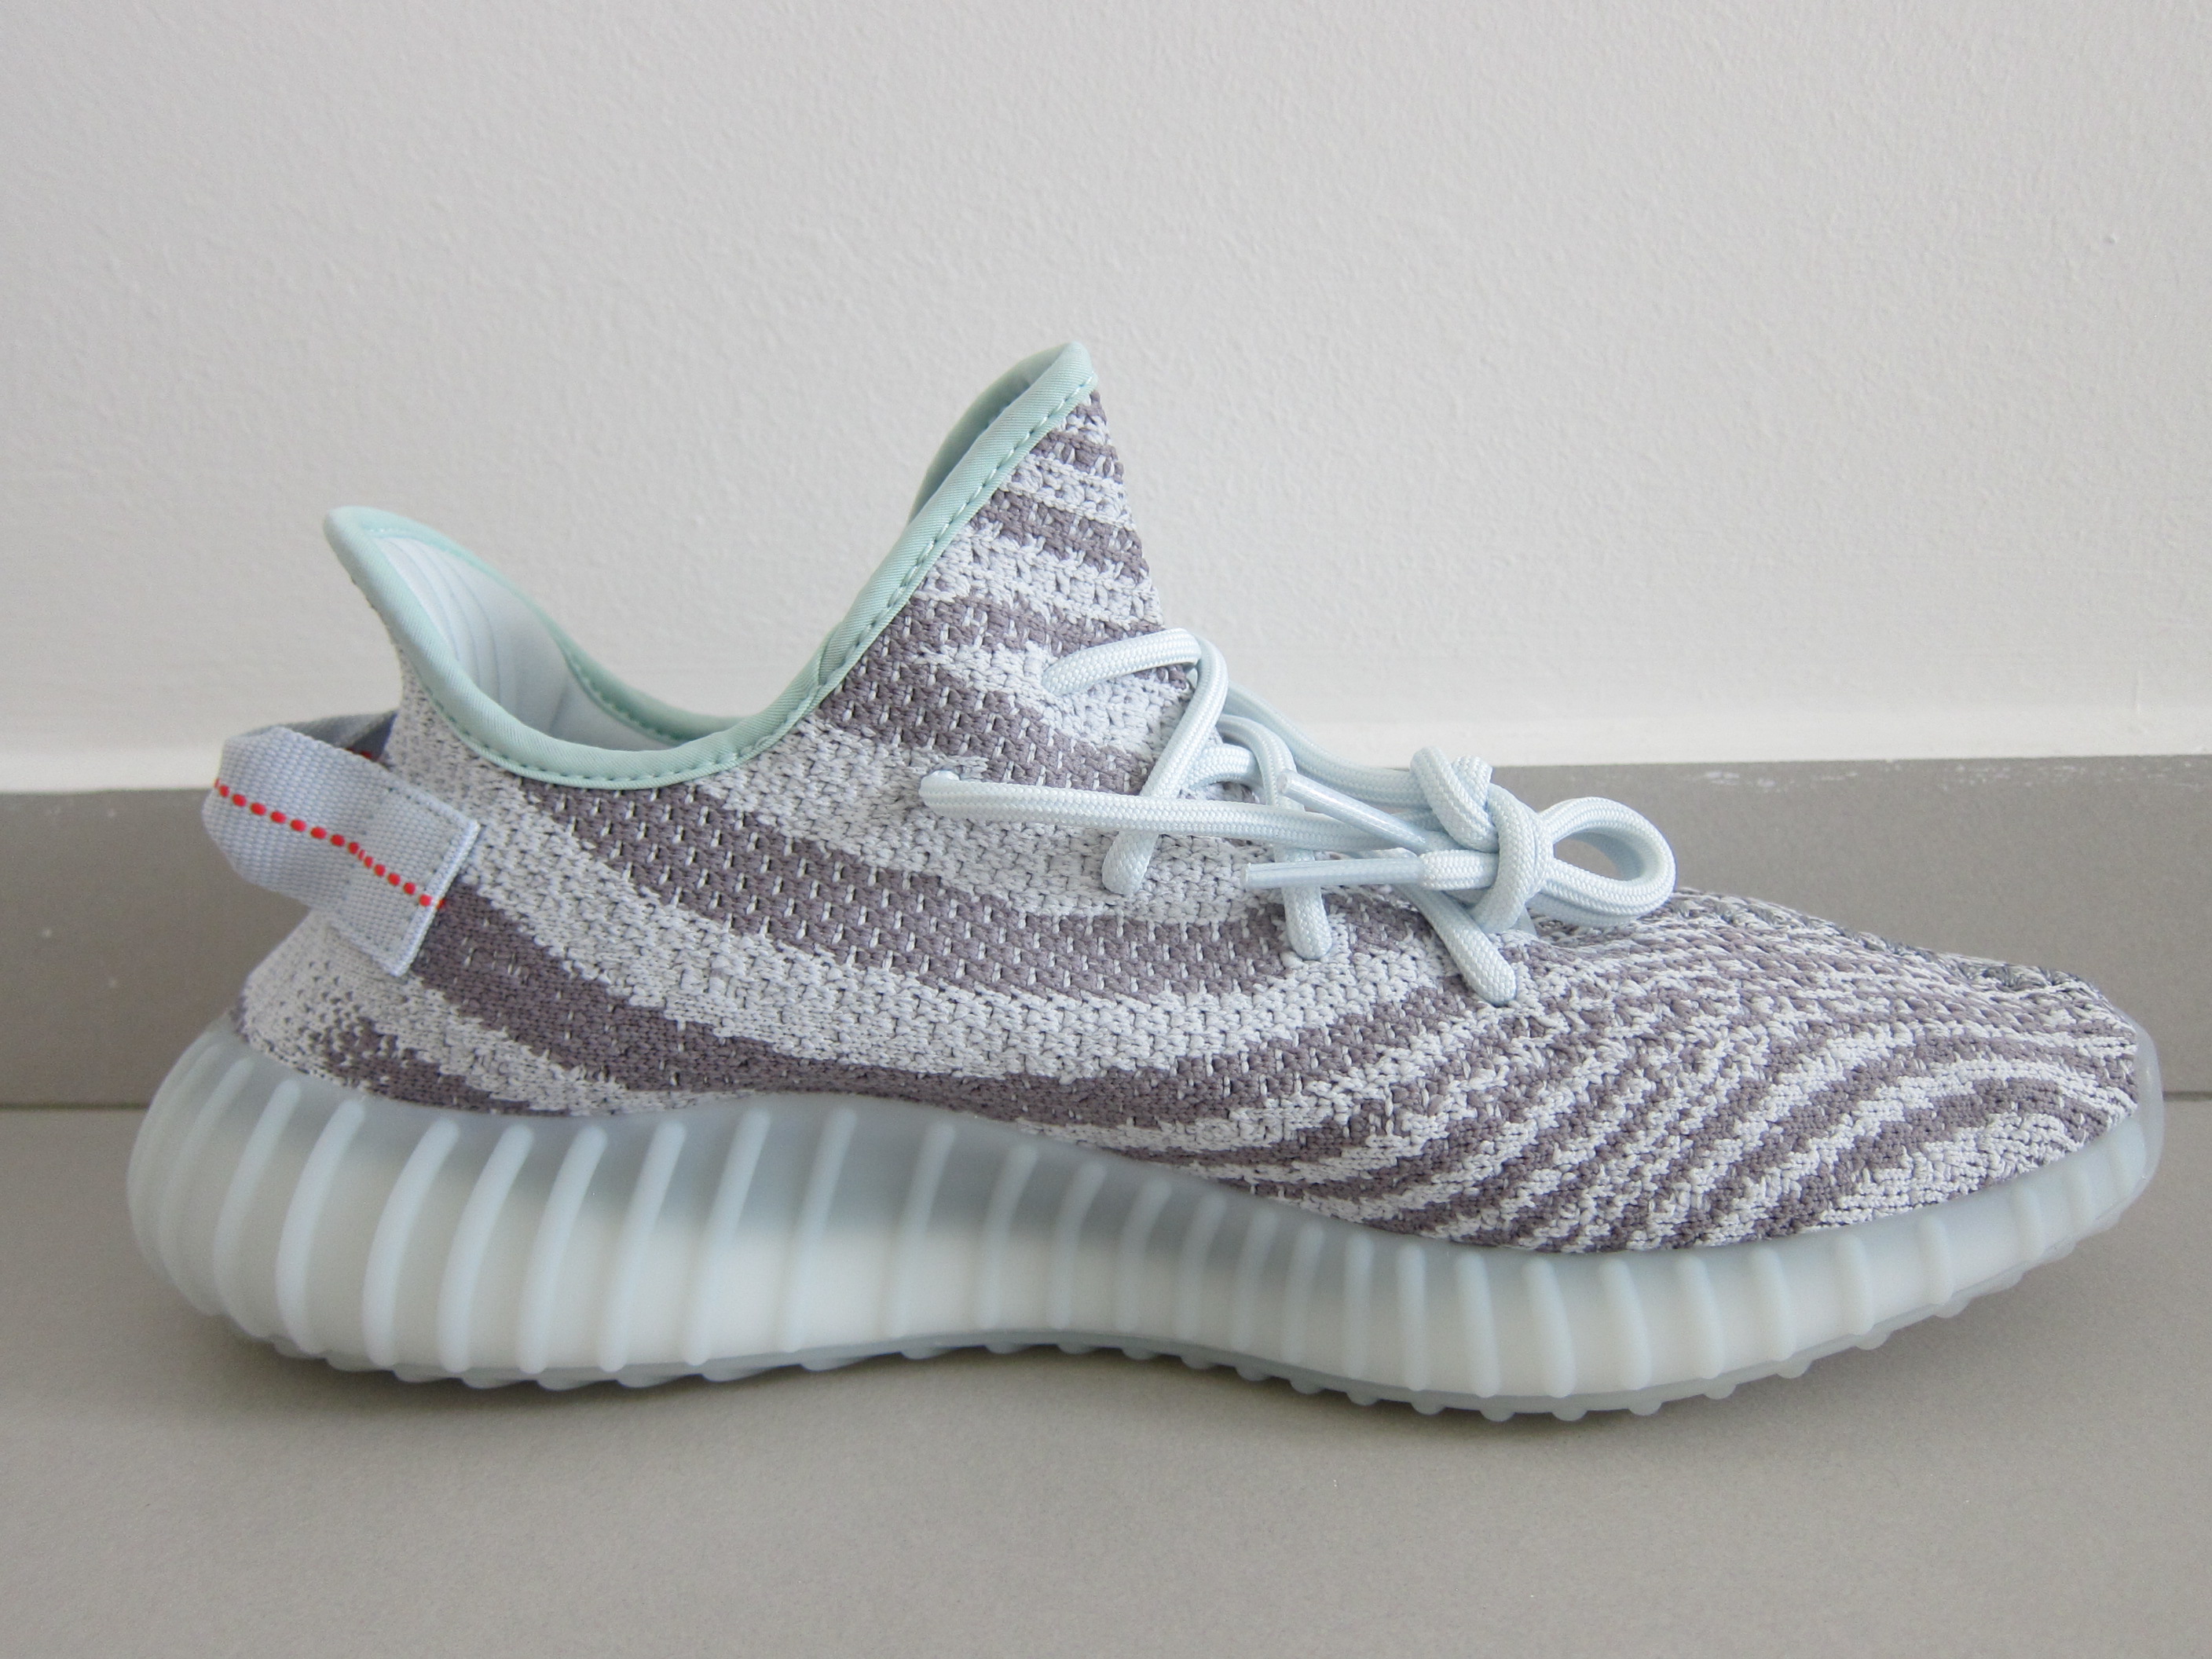 Cheap Ad Yeezy Boost 350 V2 Static Reflective